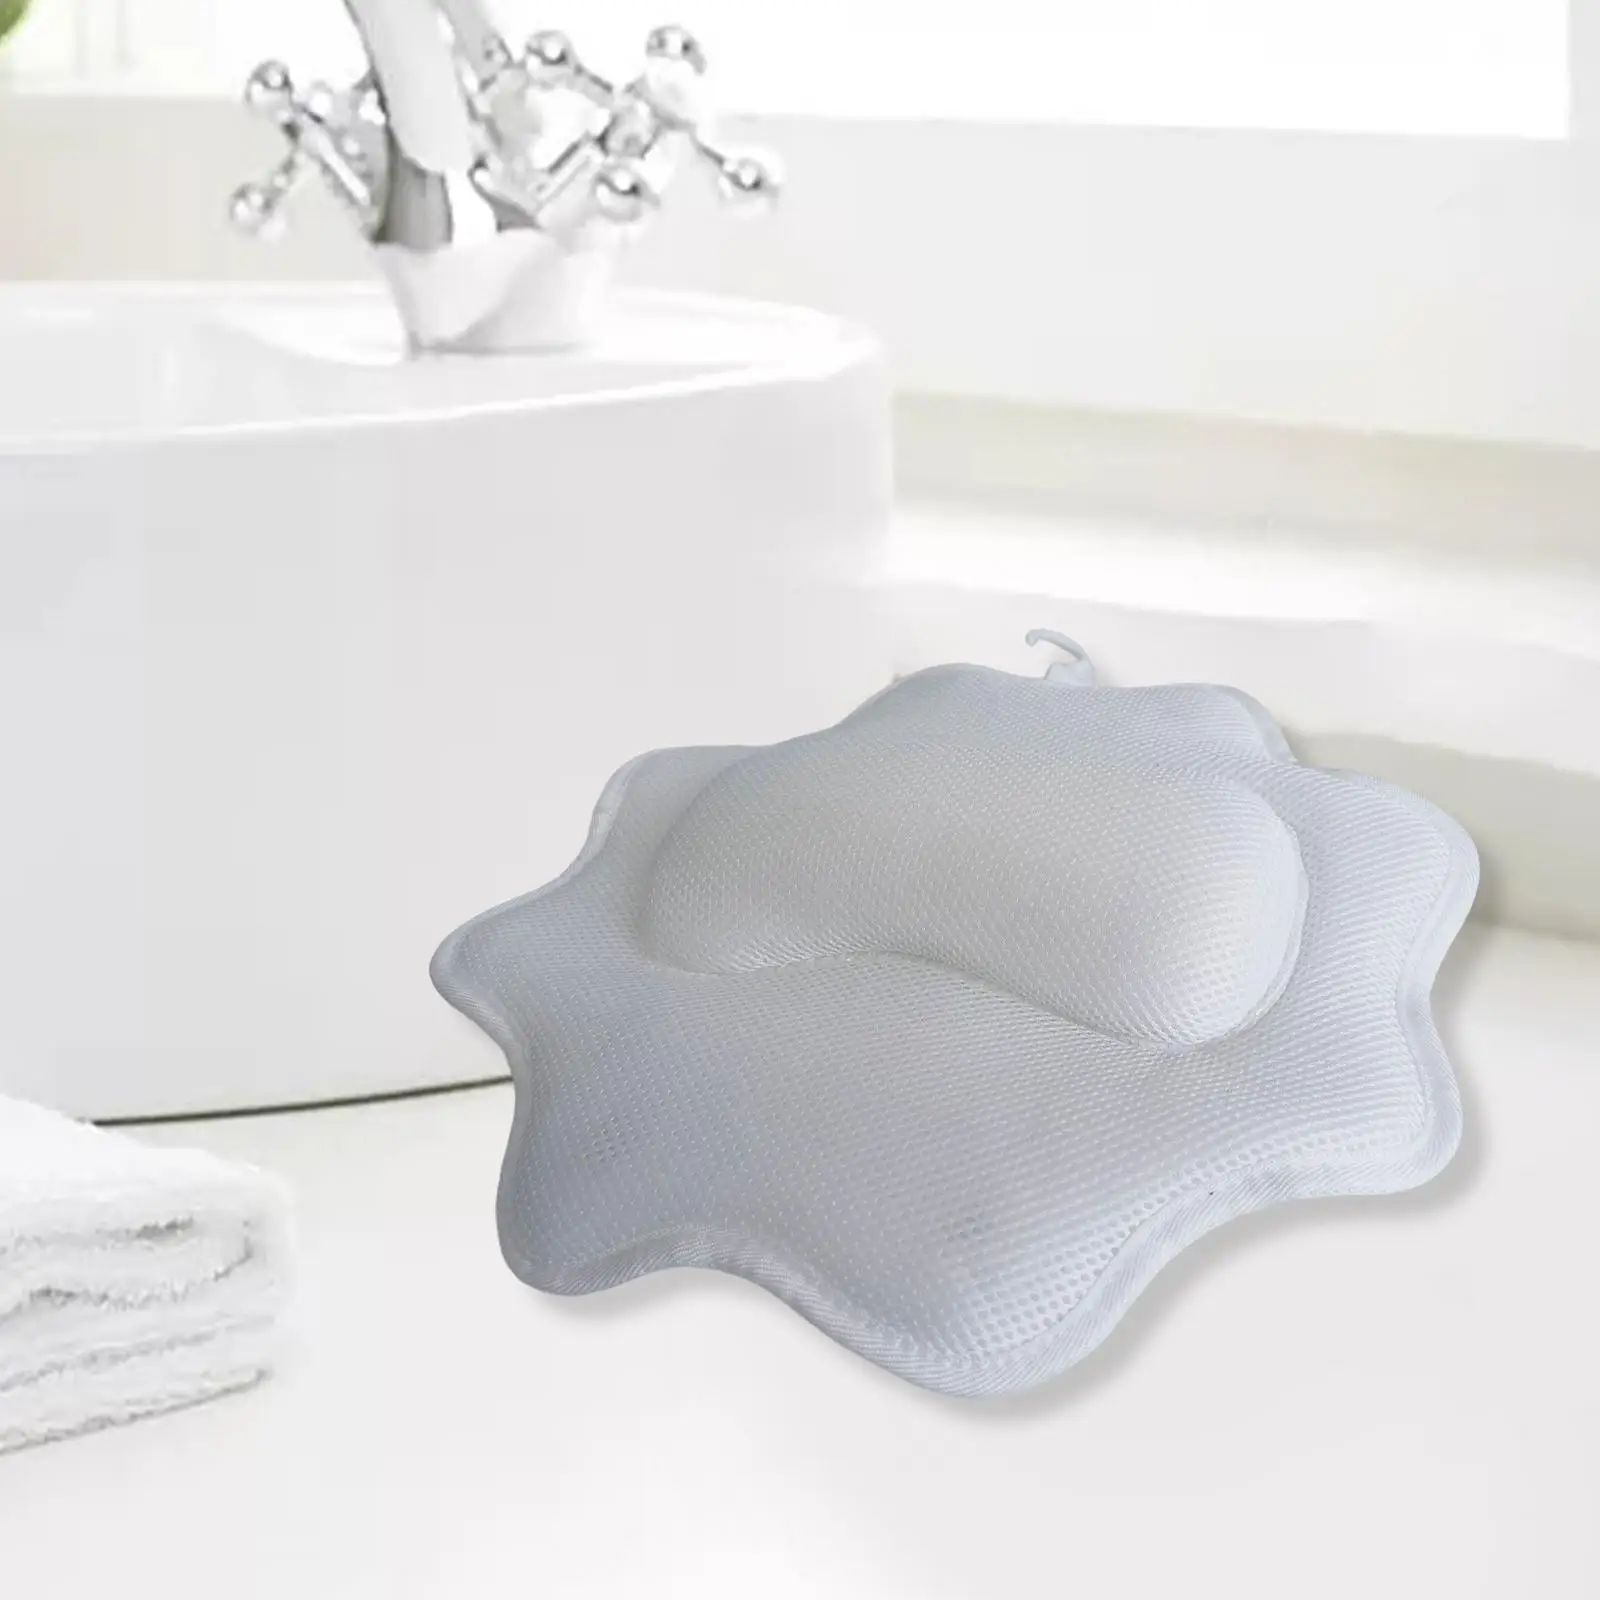 SPA Pillow Bath Tub Neck support Headrest Thickened Back Neck Support Pillow for SPA